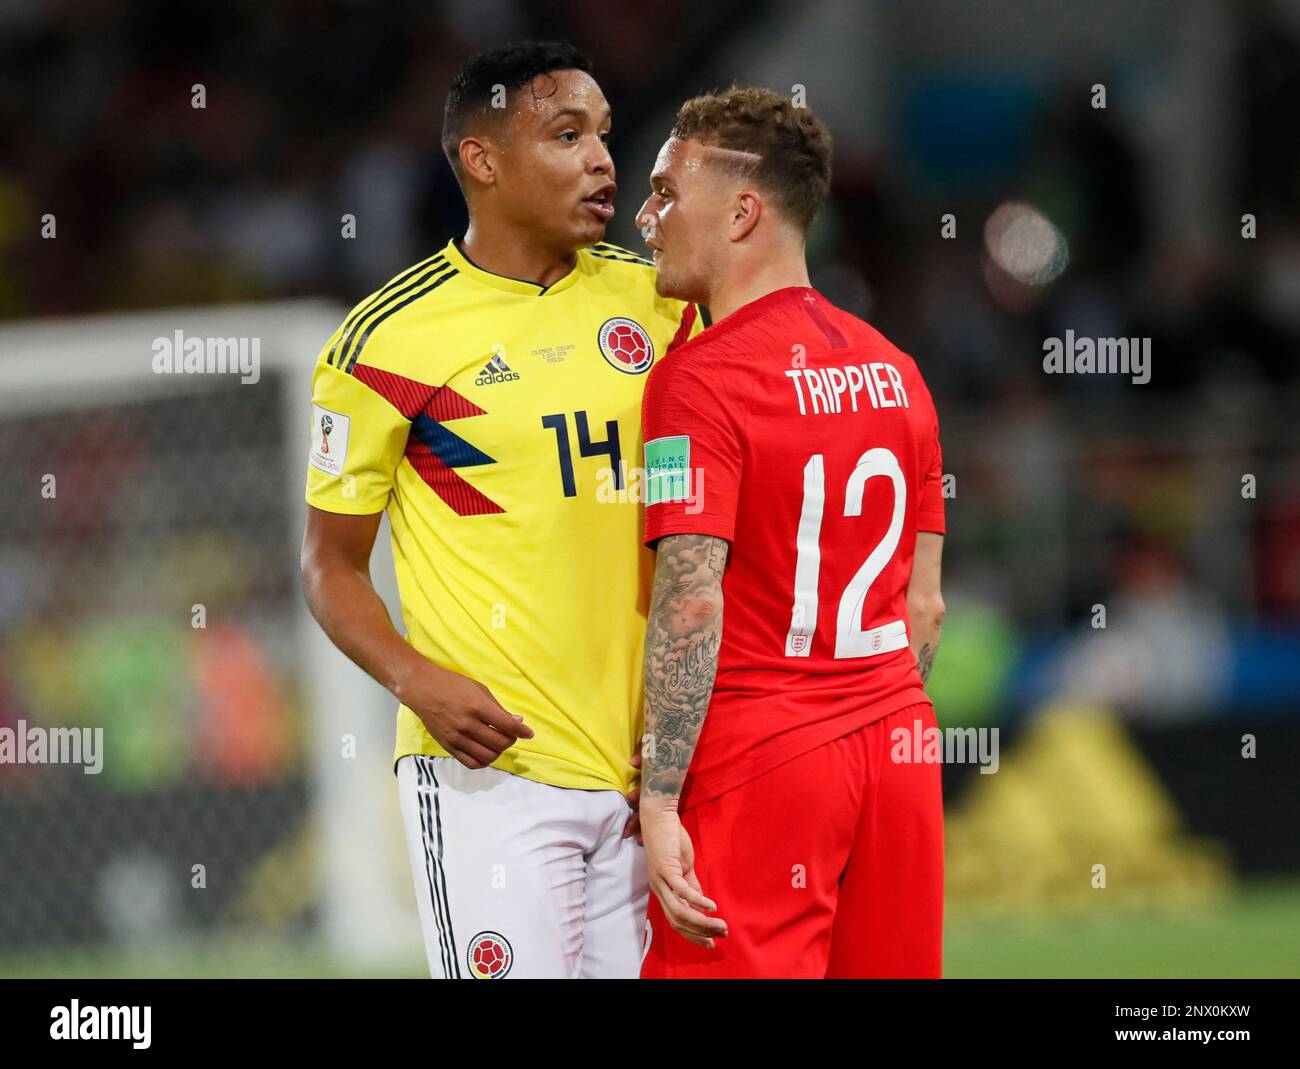 Kieran Trippier of England clashes with Luis Muriel of Colombia during the  FIFA World Cup 2018 Round of 16 match at the Spartak Stadium, Moscow.  Picture date 3rd July 2018. Picture credit